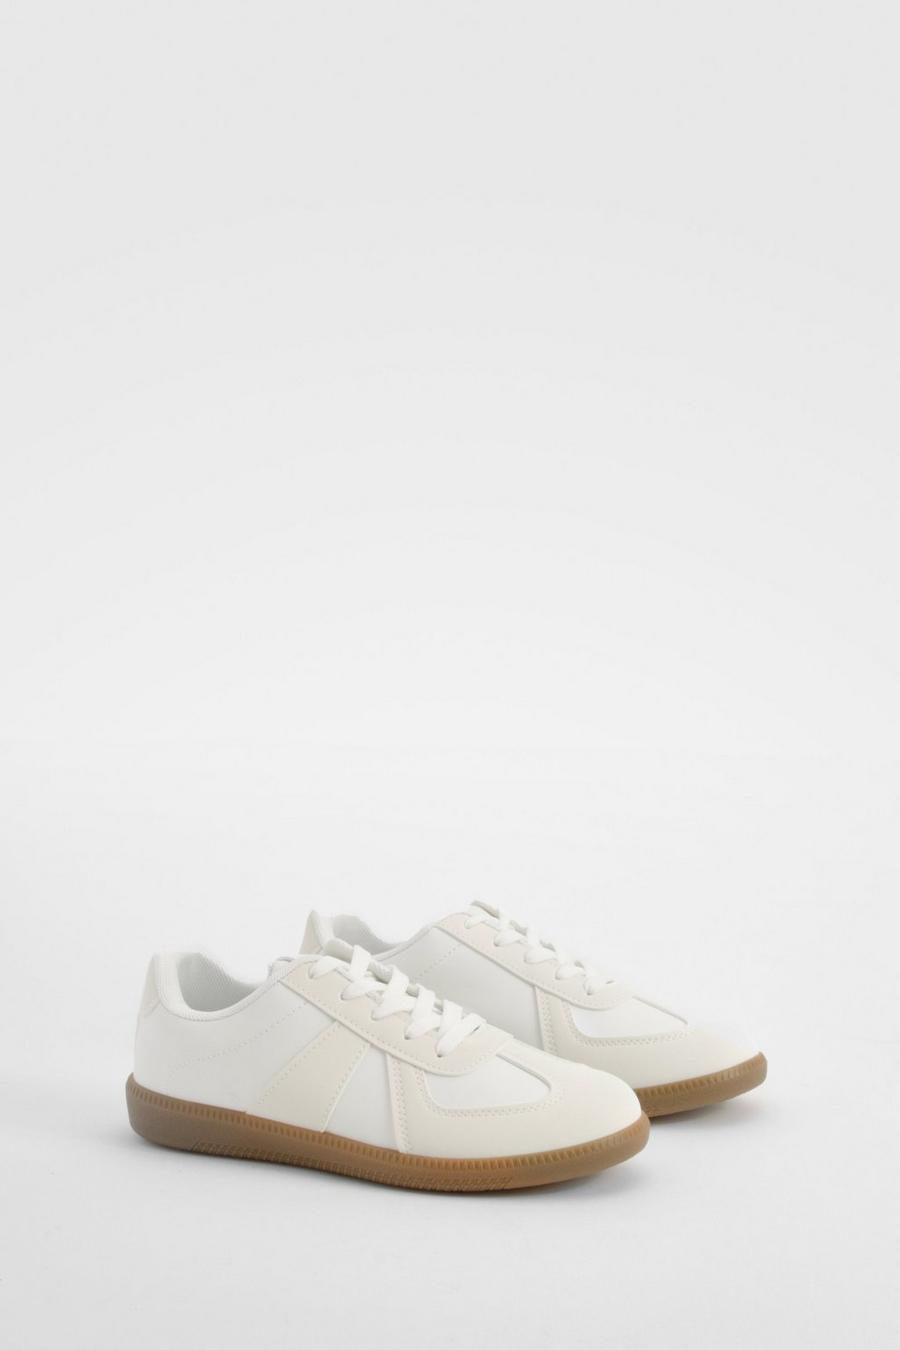 White Contrast Panel Gum Sole Sneakers